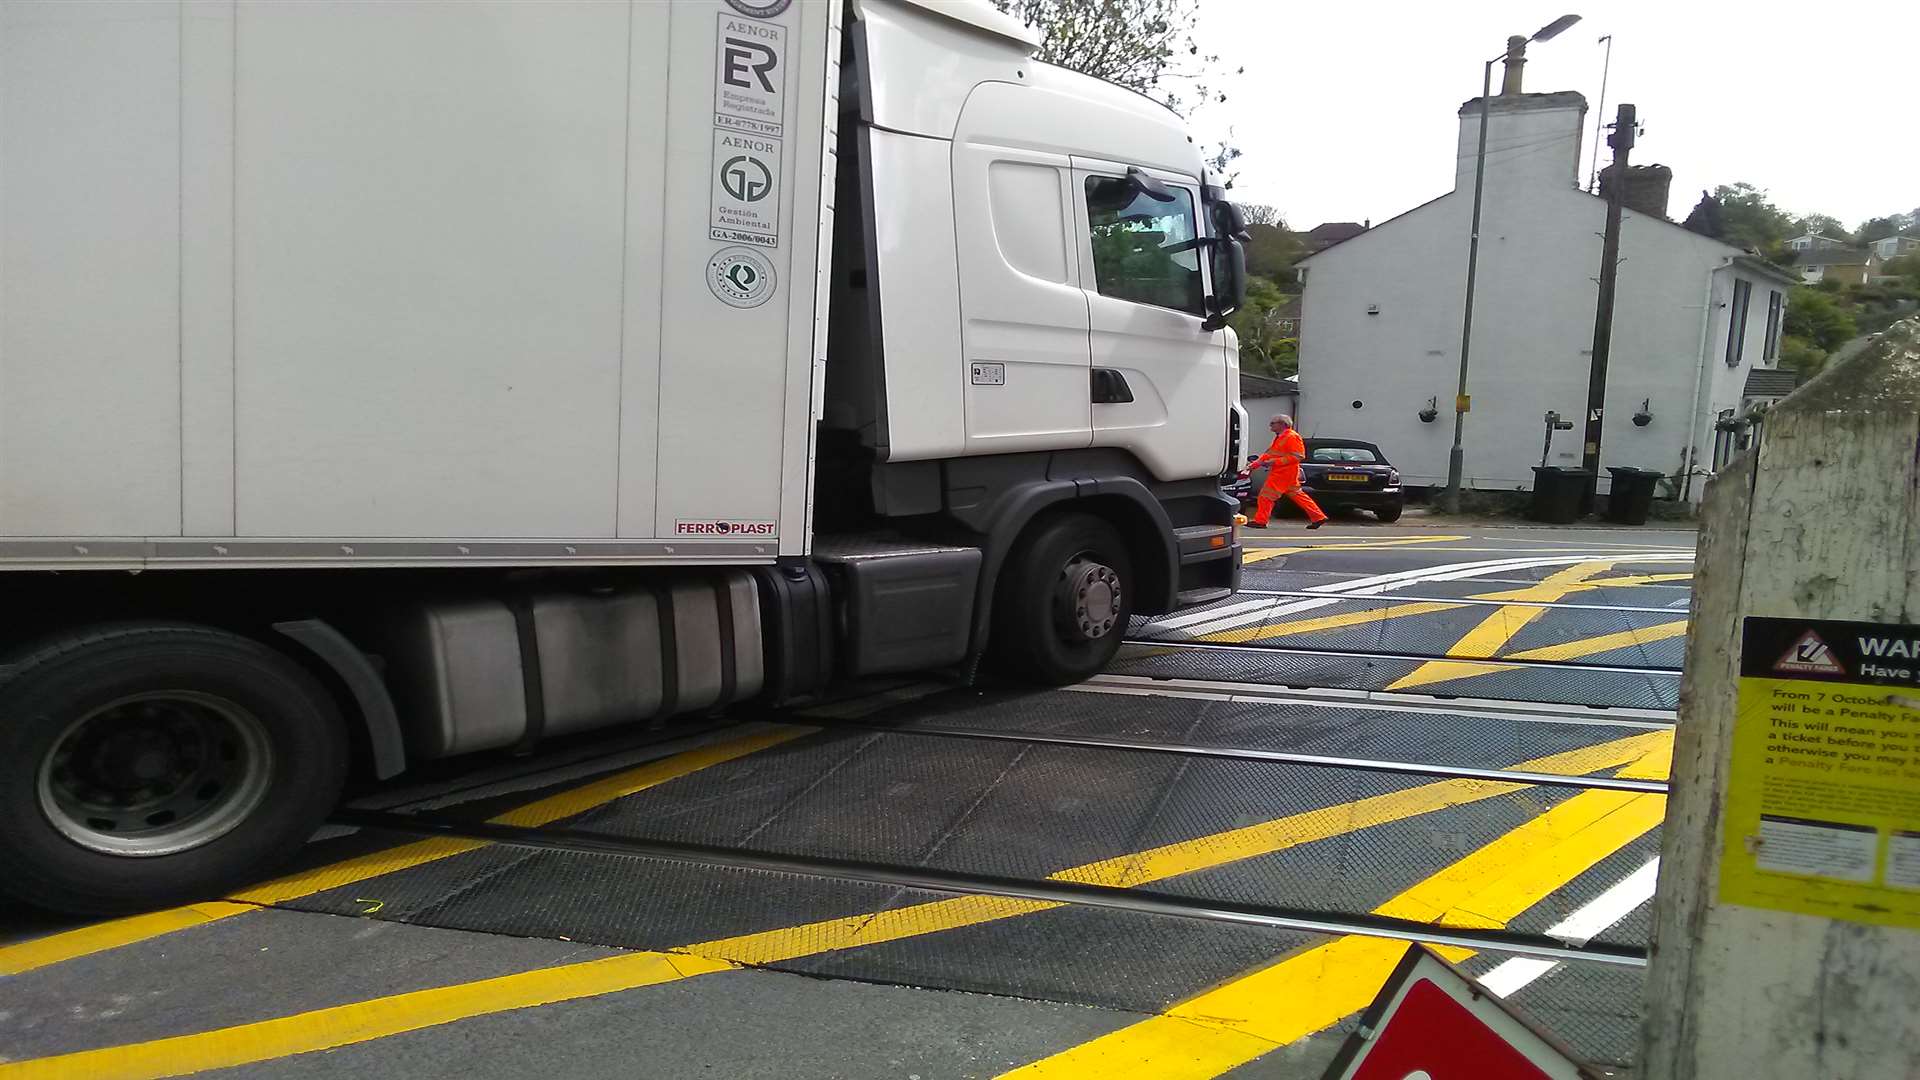 The lorry became stuck on the level crossing